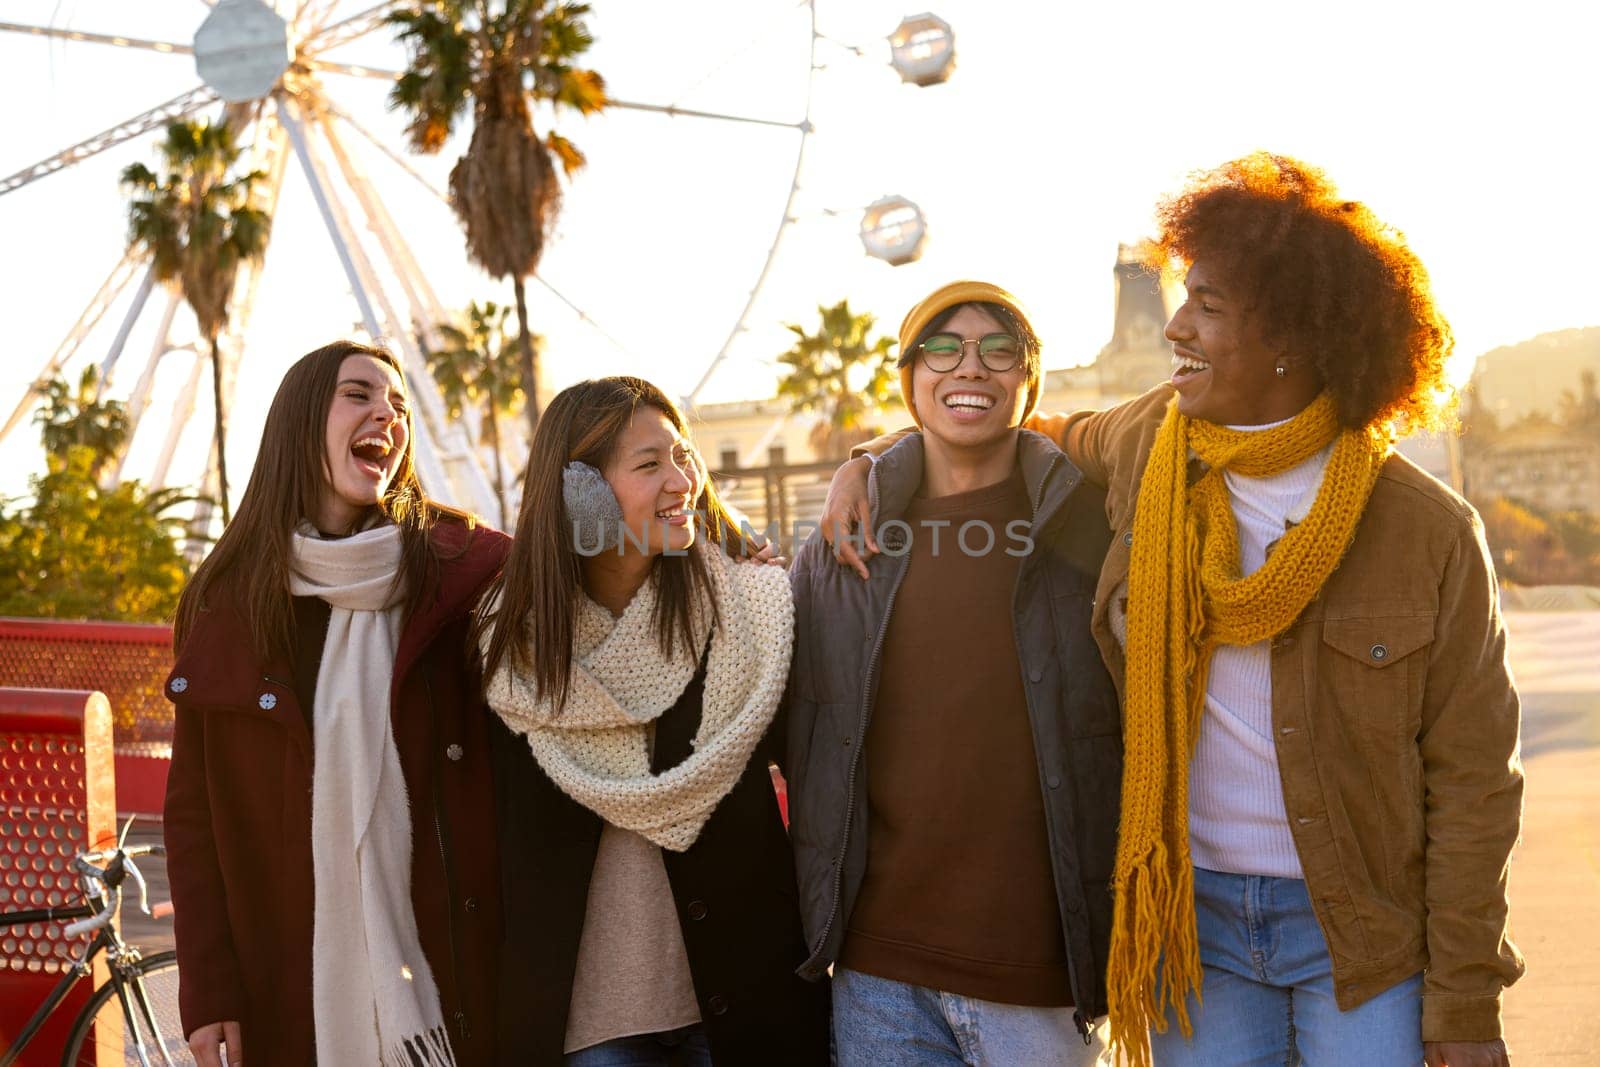 Group of happy multiracial college student friends laughing embracing together while walking around city on a sunny winter day. Friendship and lifestyle concept.